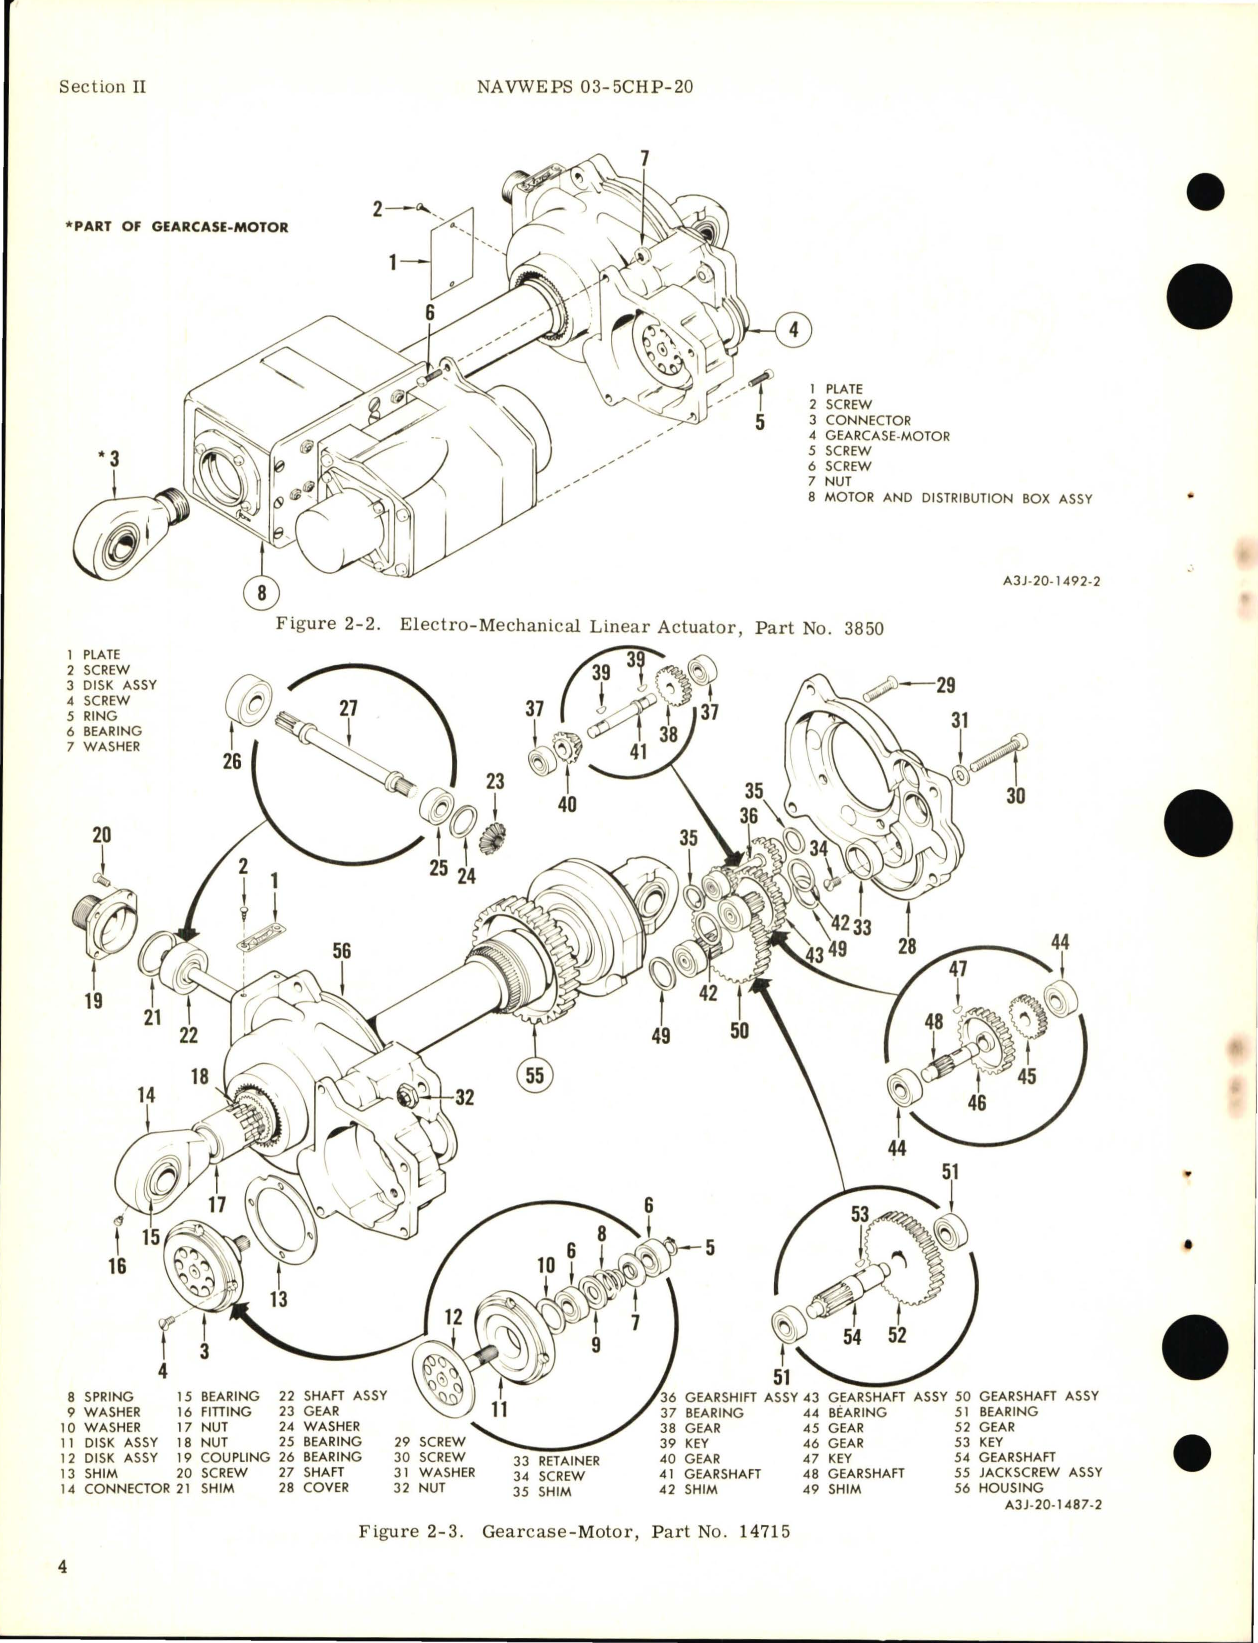 Sample page 8 from AirCorps Library document: Overhaul Instructions for Electro-Mechanical Linear Actuator 3850, 3850-1, 4060, and 4060-1